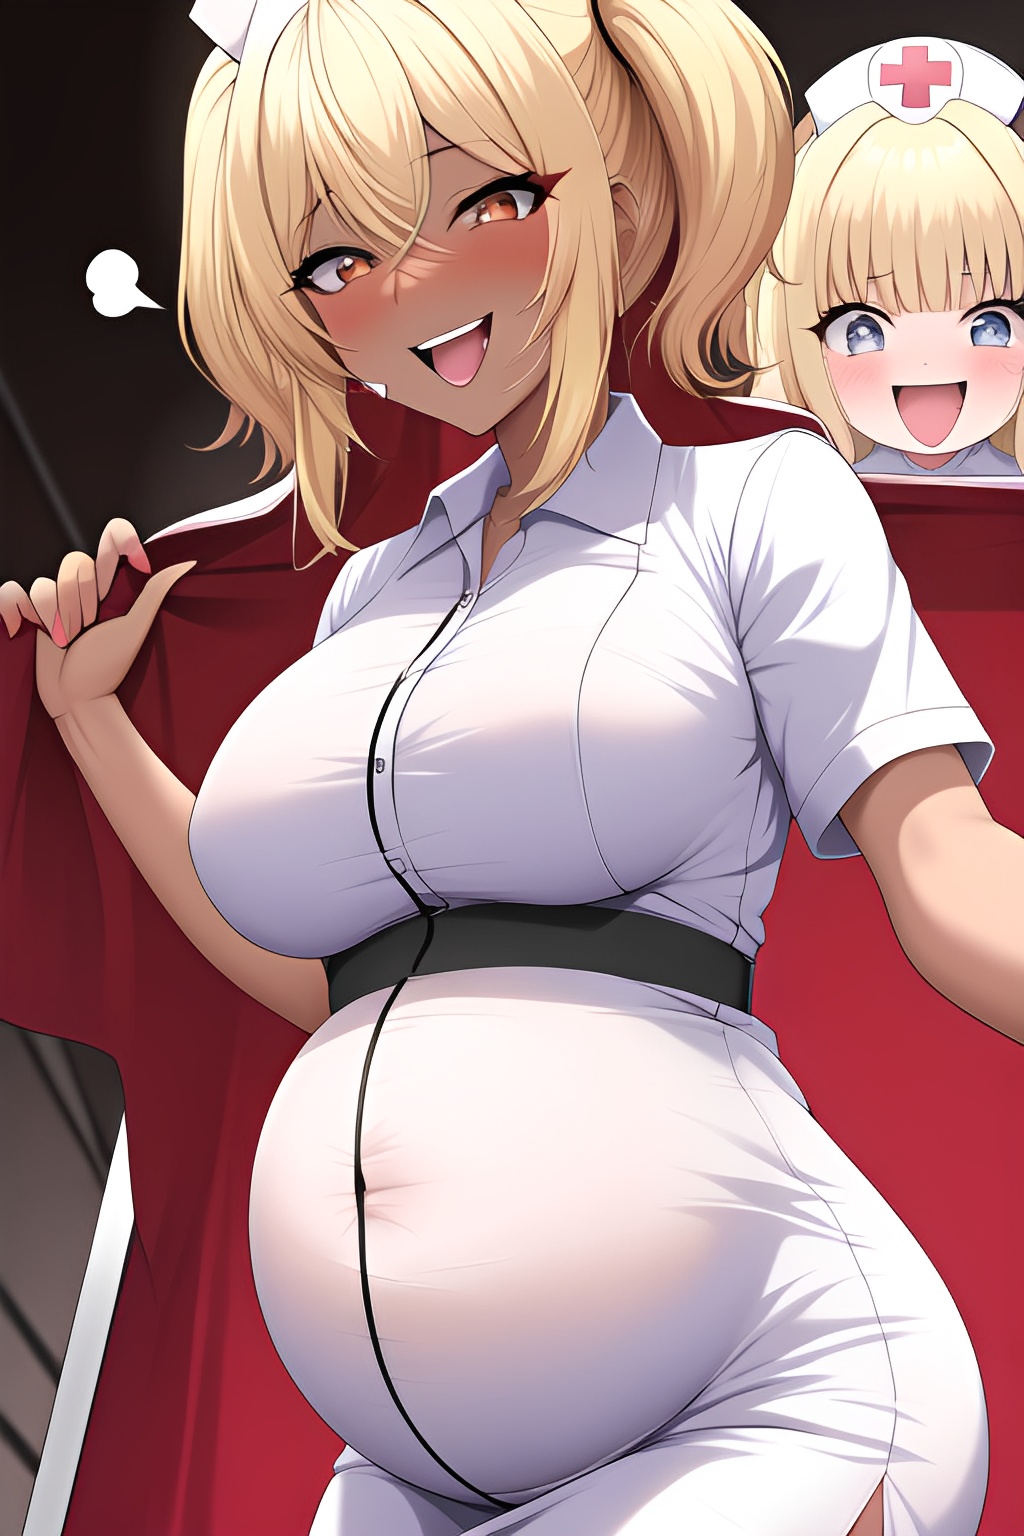 1024px x 1536px - Anime Pregnant Small Tits 50s Age Laughing Face Blonde Bangs Hair Style  Dark Skin Comic Stage Close Up View Cumshot Nurse 3664419714742354087 - AI  Hentai